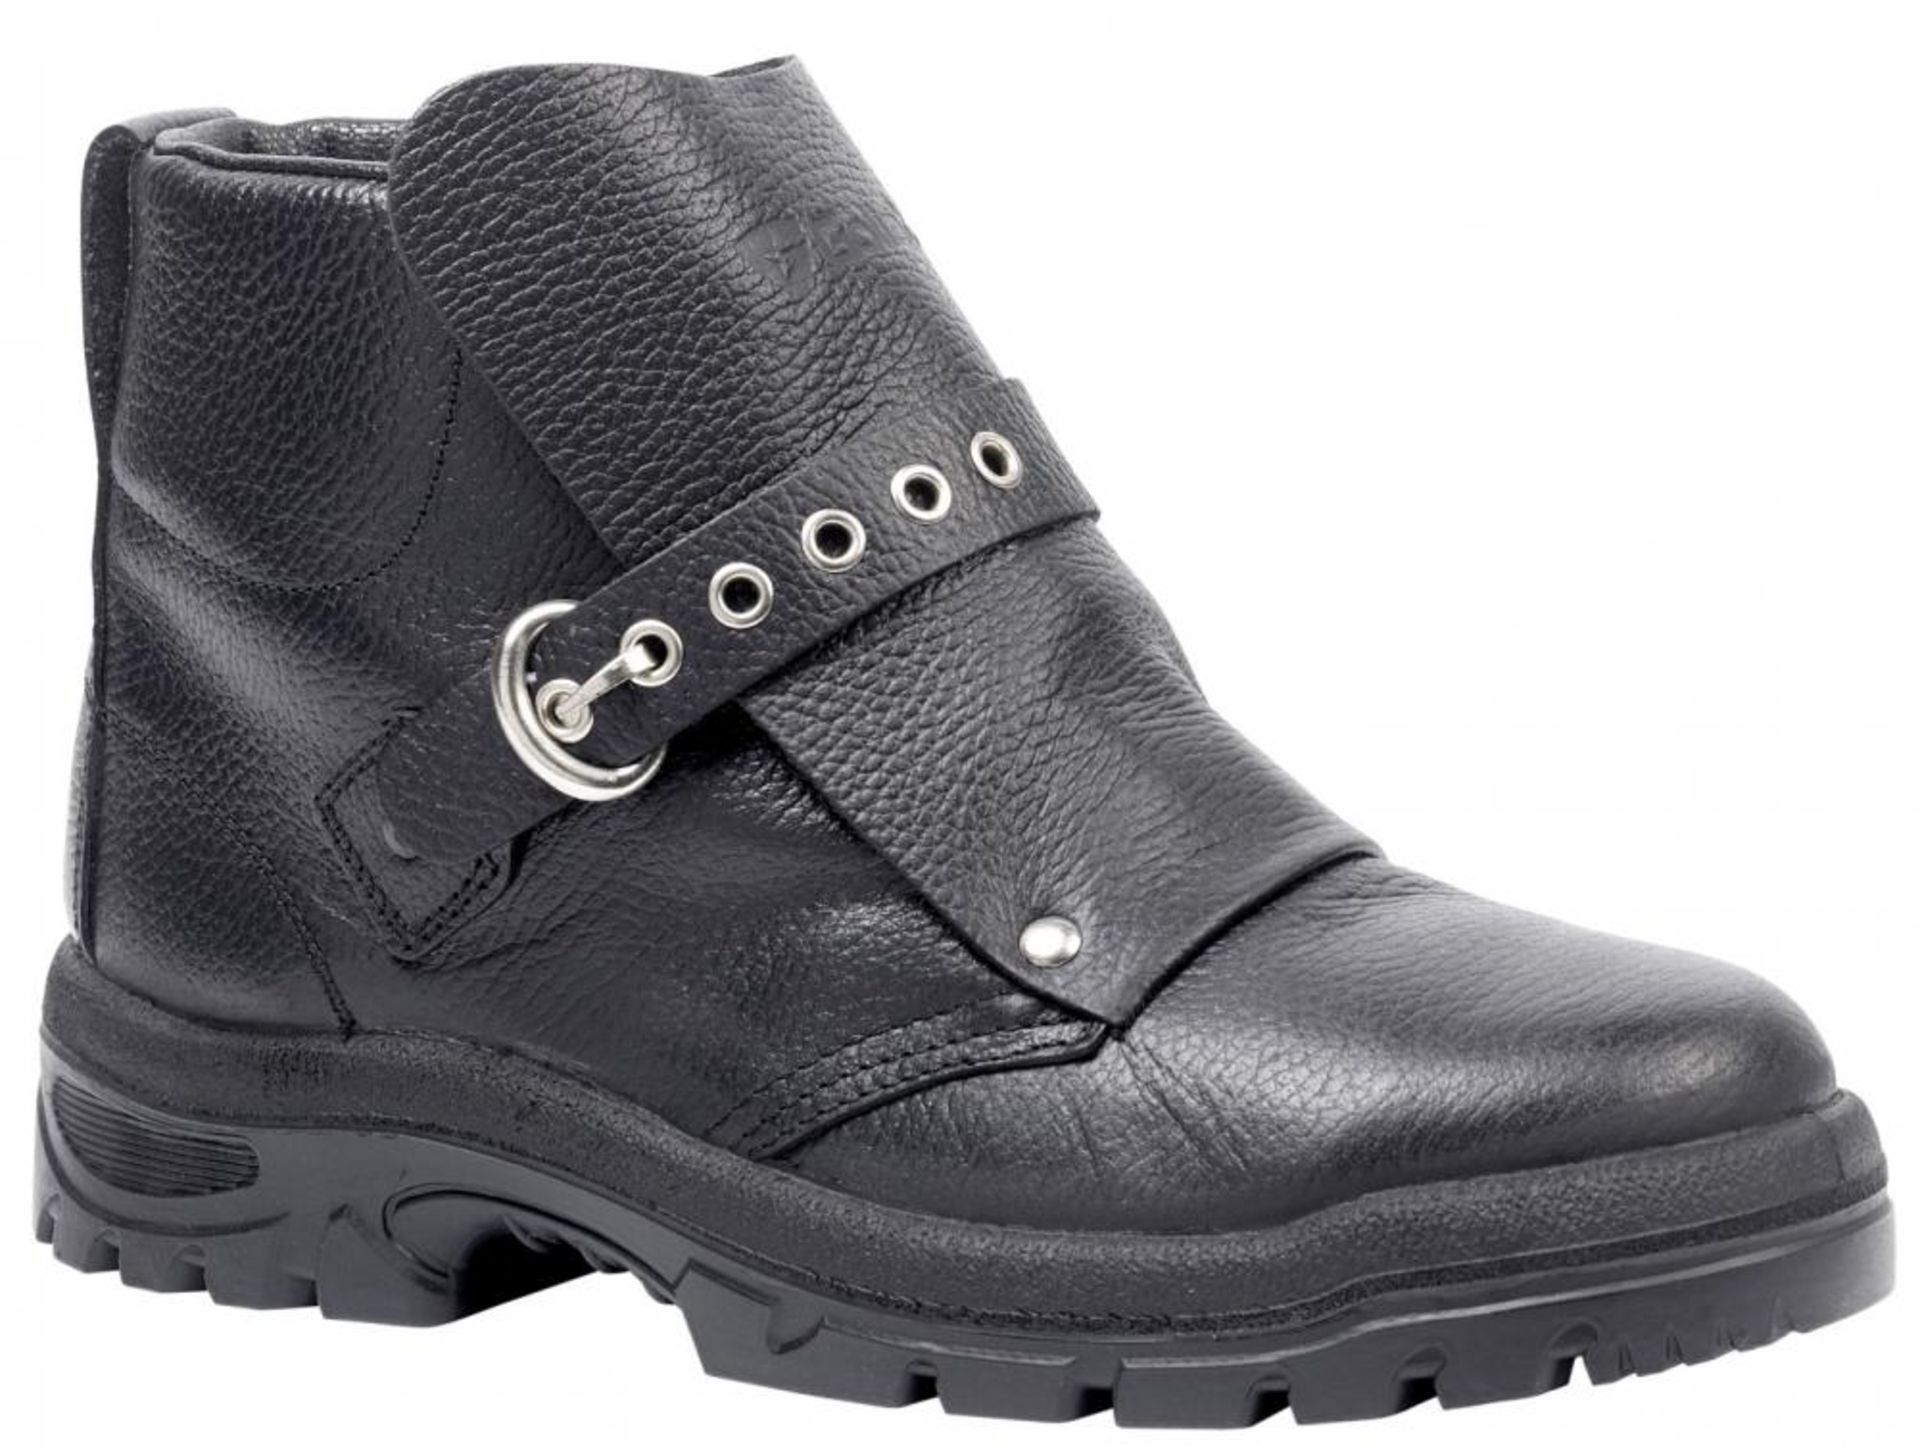 1 x Pair of Goliath Foundry Ankle Boots BL Wide With Steel Midsole - HM2001WSI - Size 6/39 - CL185 -